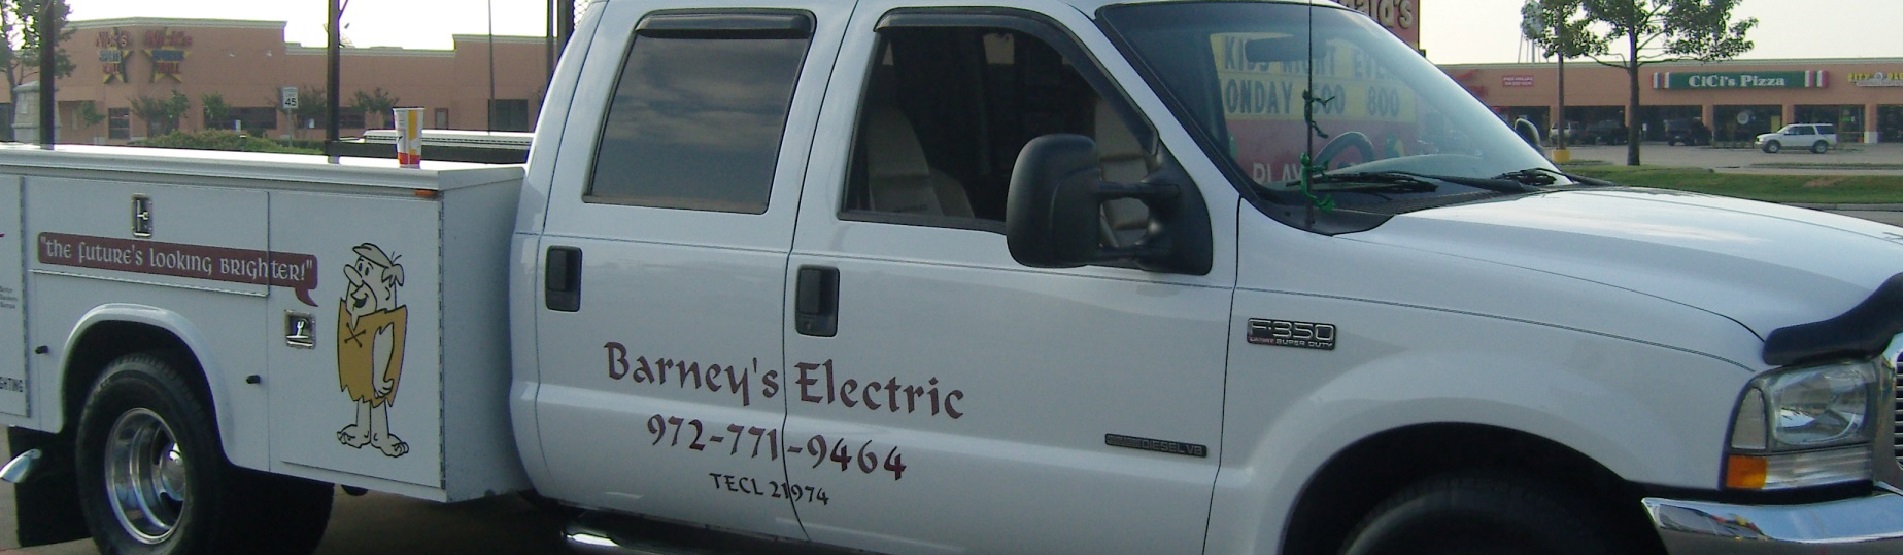 Electrician Rockwall TX Barney's Electric Full Service Electrician Residential Commercial Retail and New Construction Wiring Repair Installation Service 24 Hour Emergency Services Master Electrician Rockwall Texas